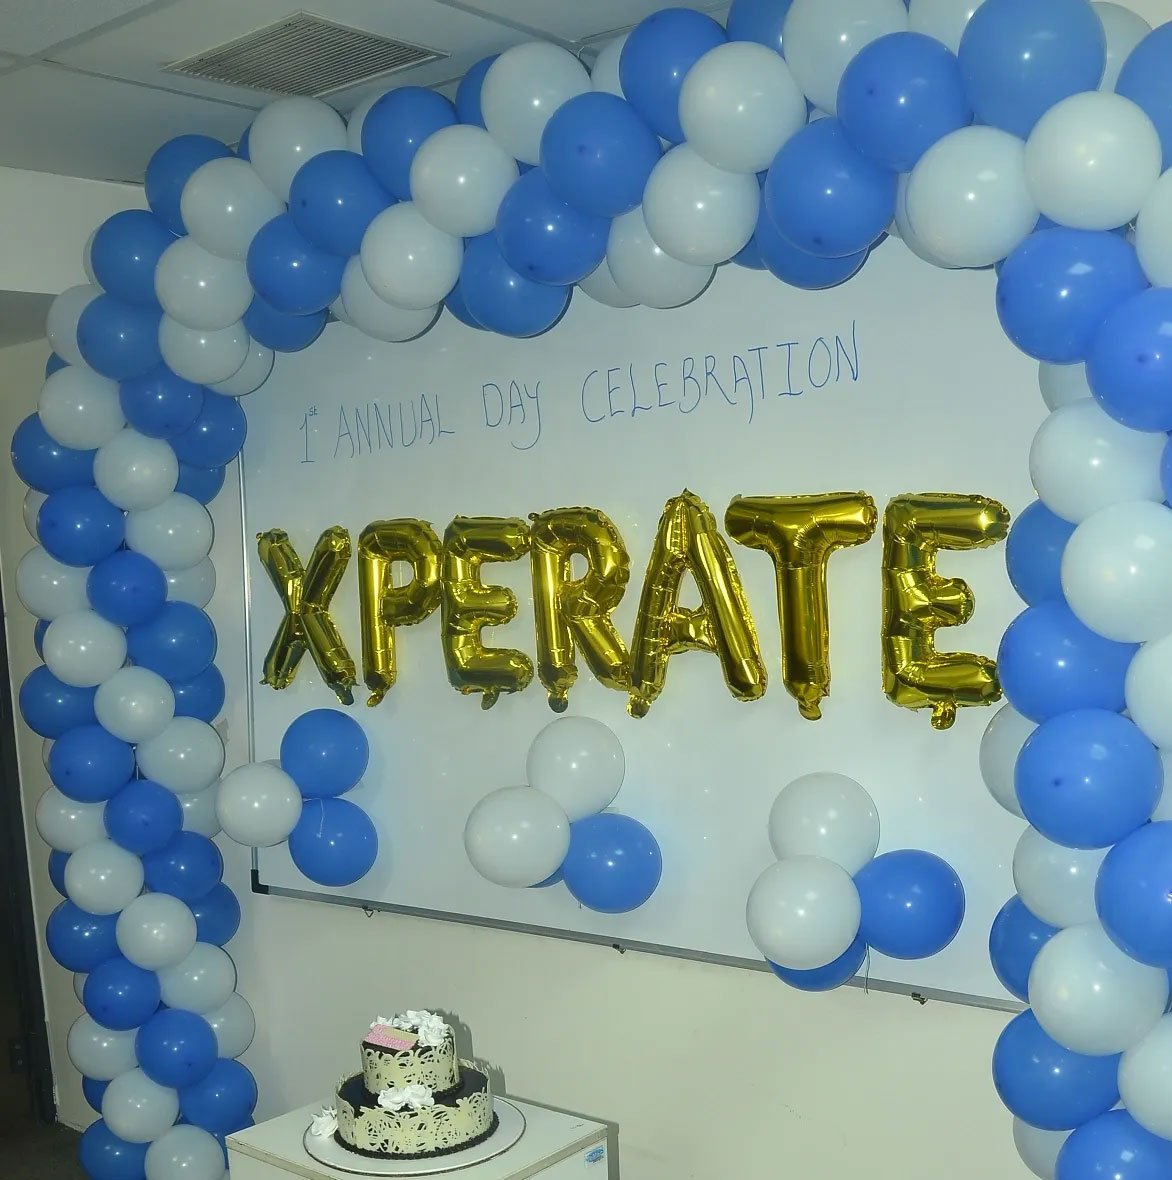 xperate-birthday-3